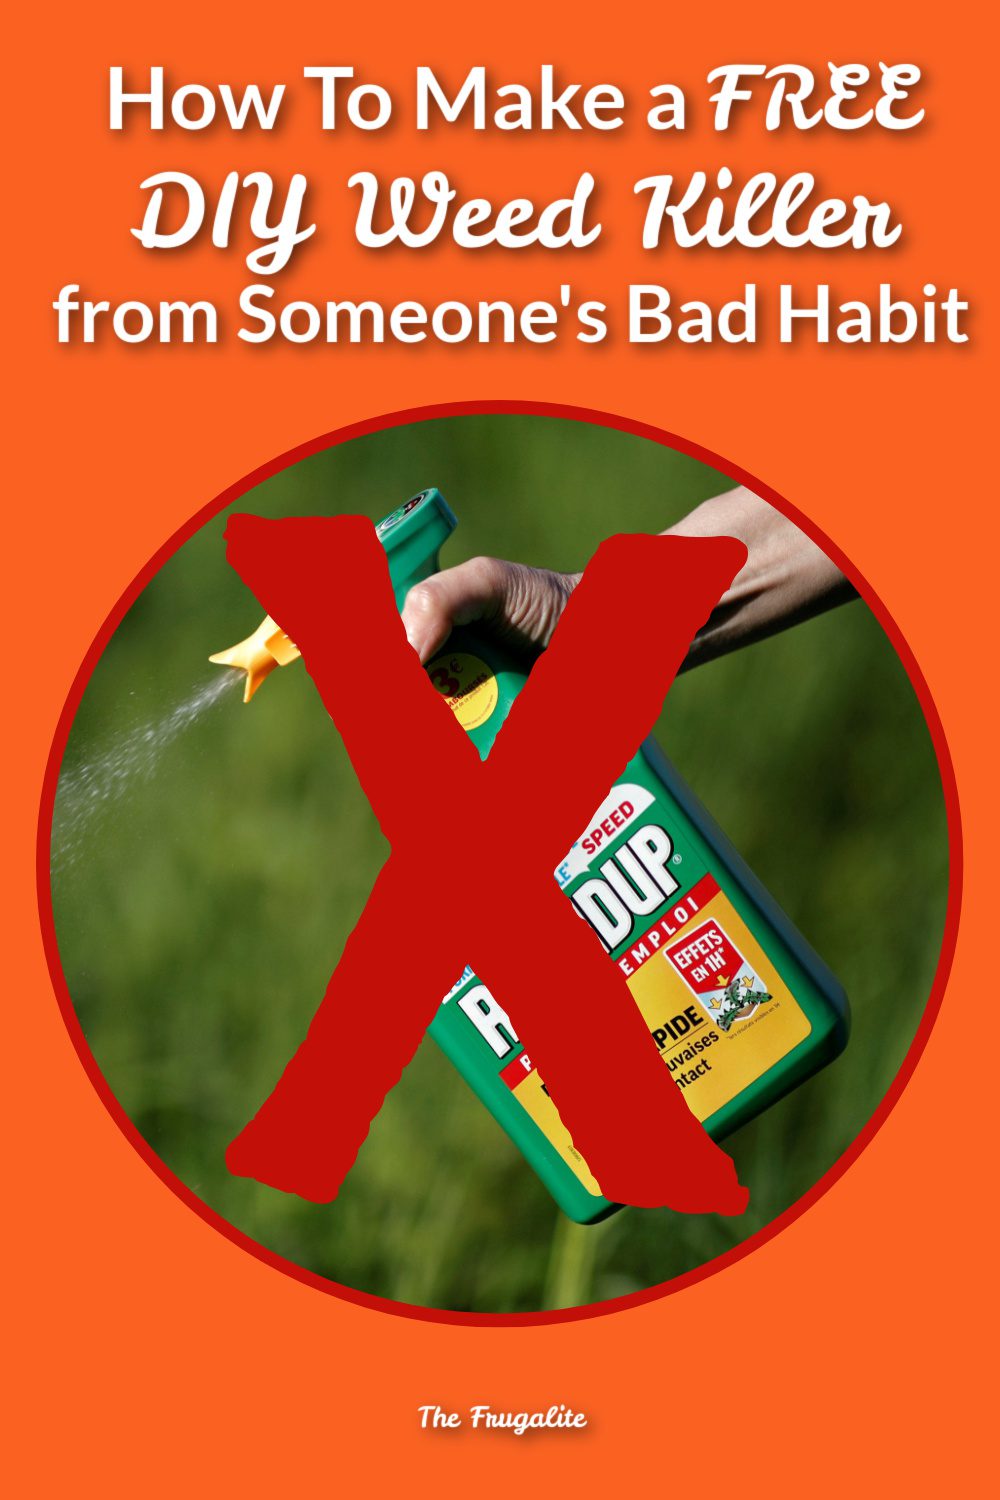 How To Make a FREE DIY Weed Killer from Someone\'s Bad Habit